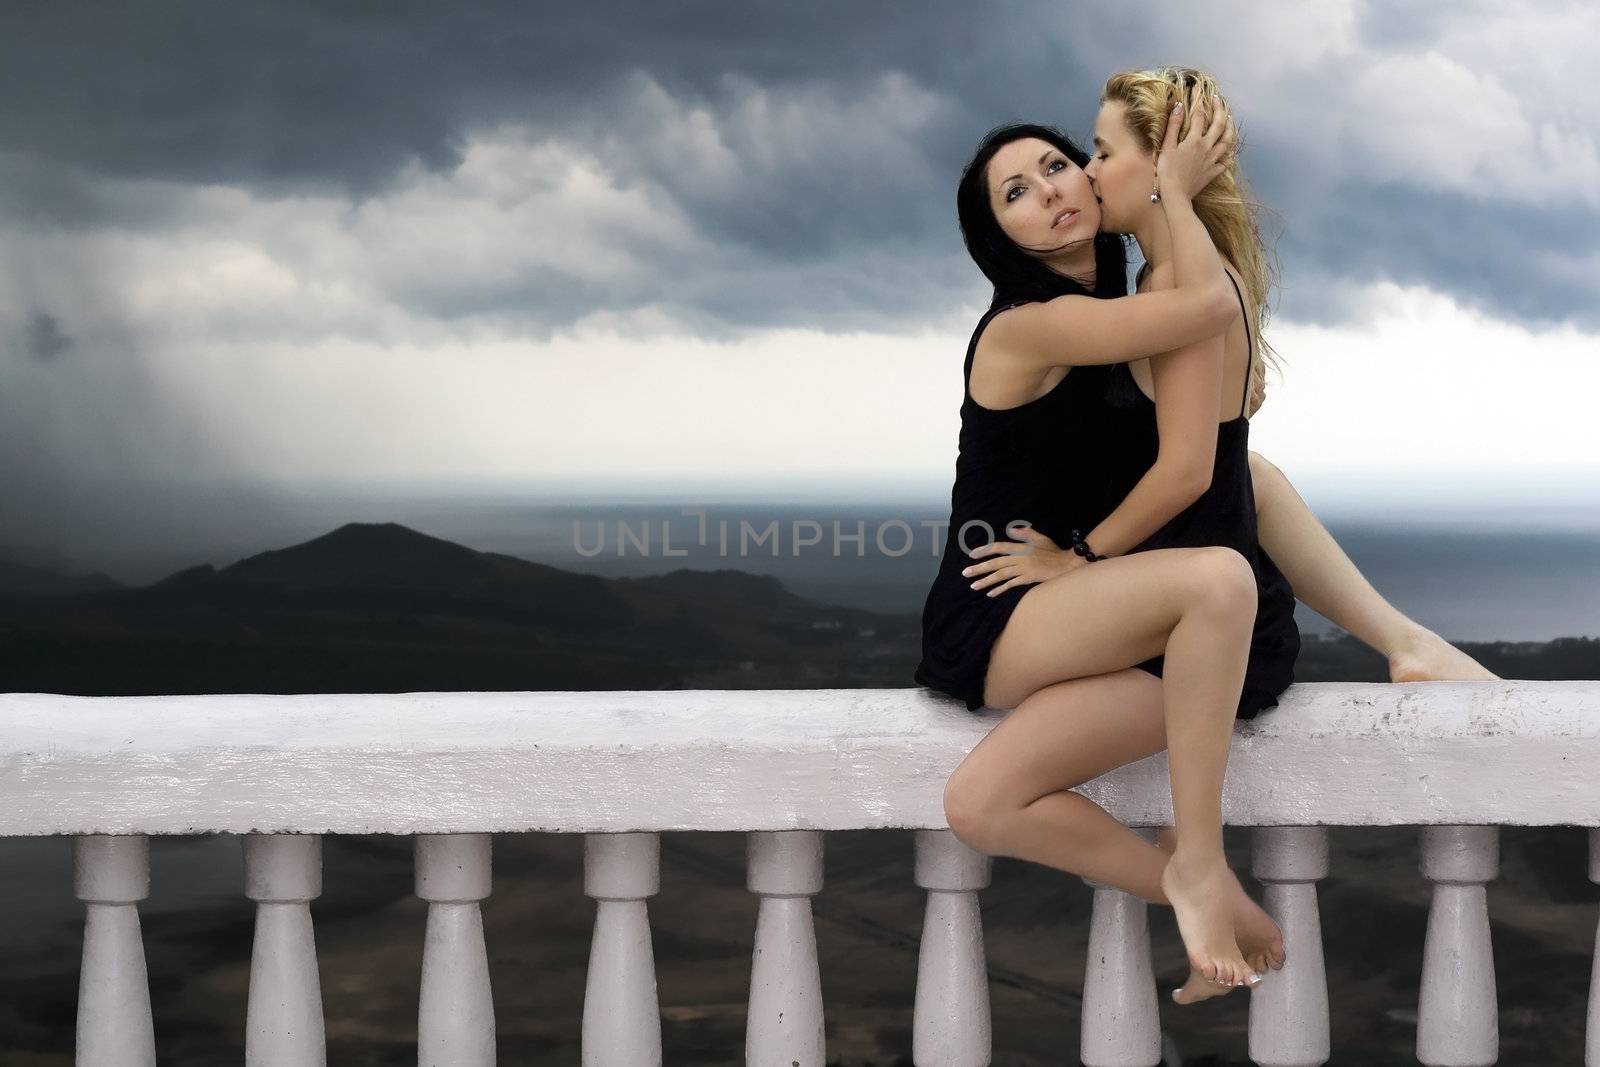 Two pretty embracing girls sit on a handrail